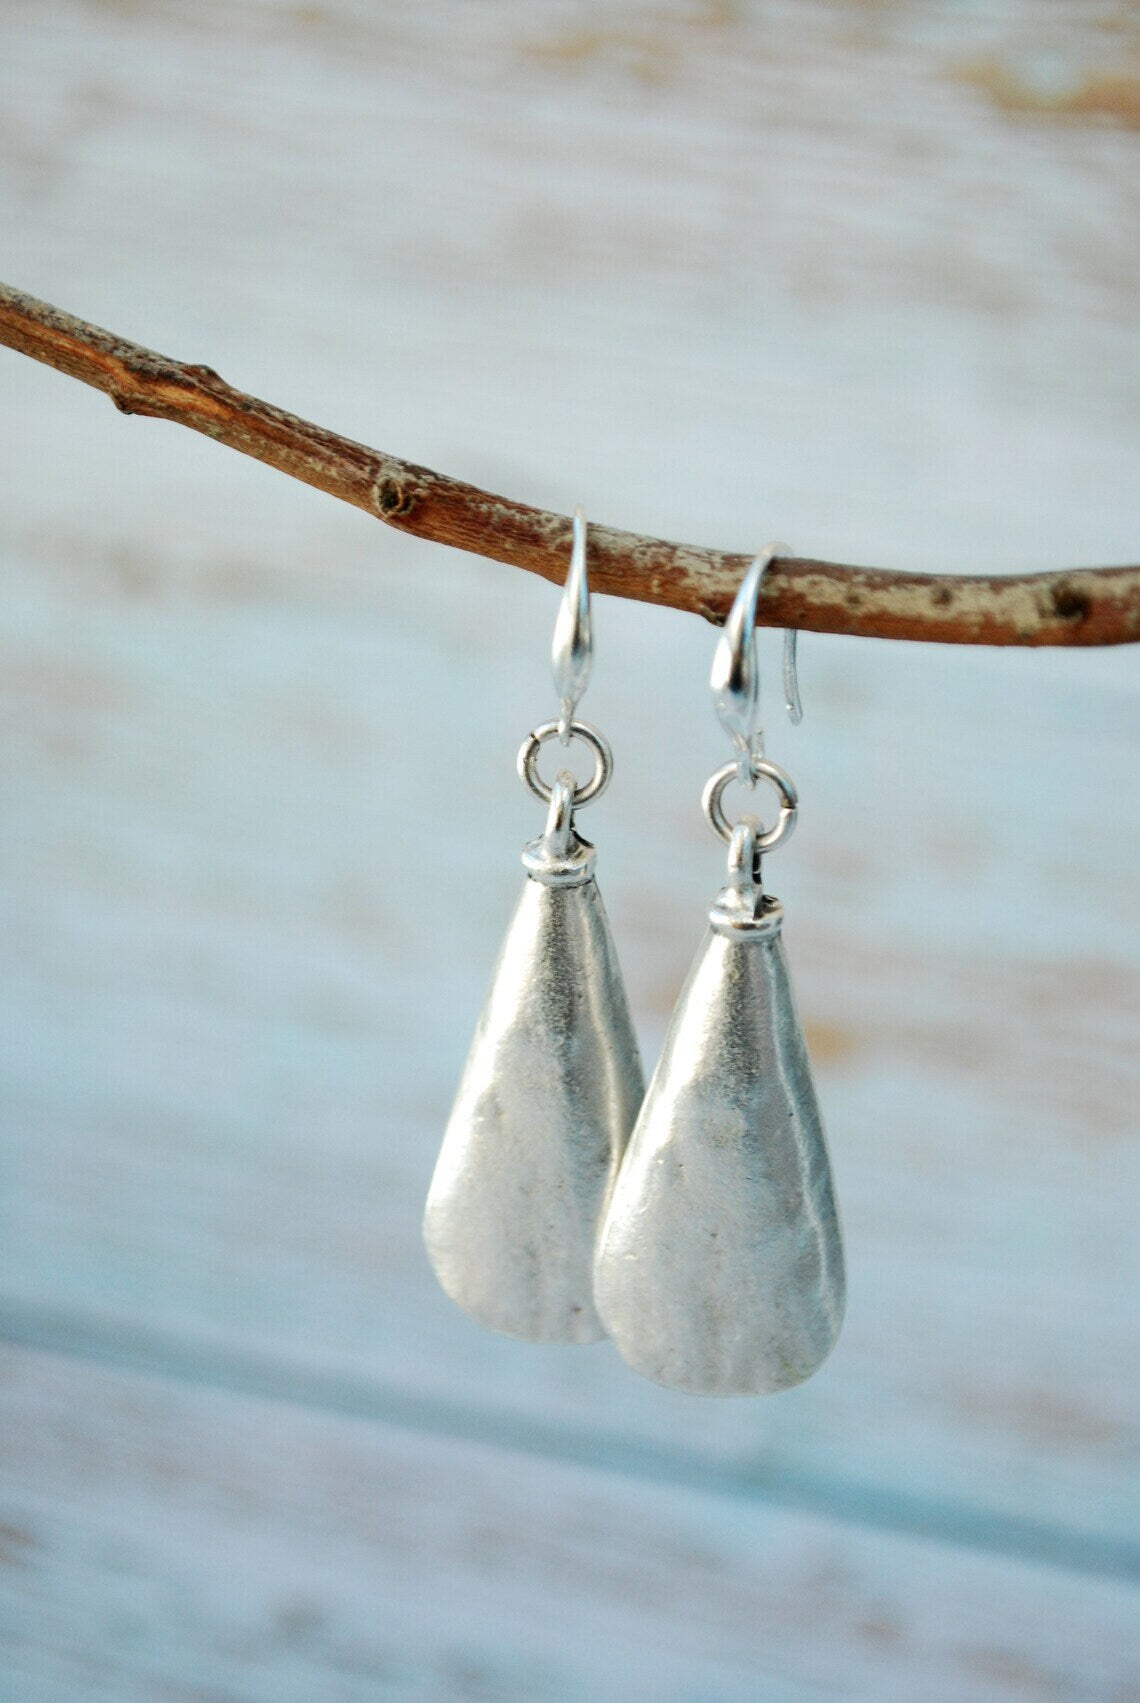 Abstract Shape Silver Tone Earrings - Exclusive Estibela Design for a Unique Look - Lightweight - Perfect for Boho, Gypsy and Hippie Outfits